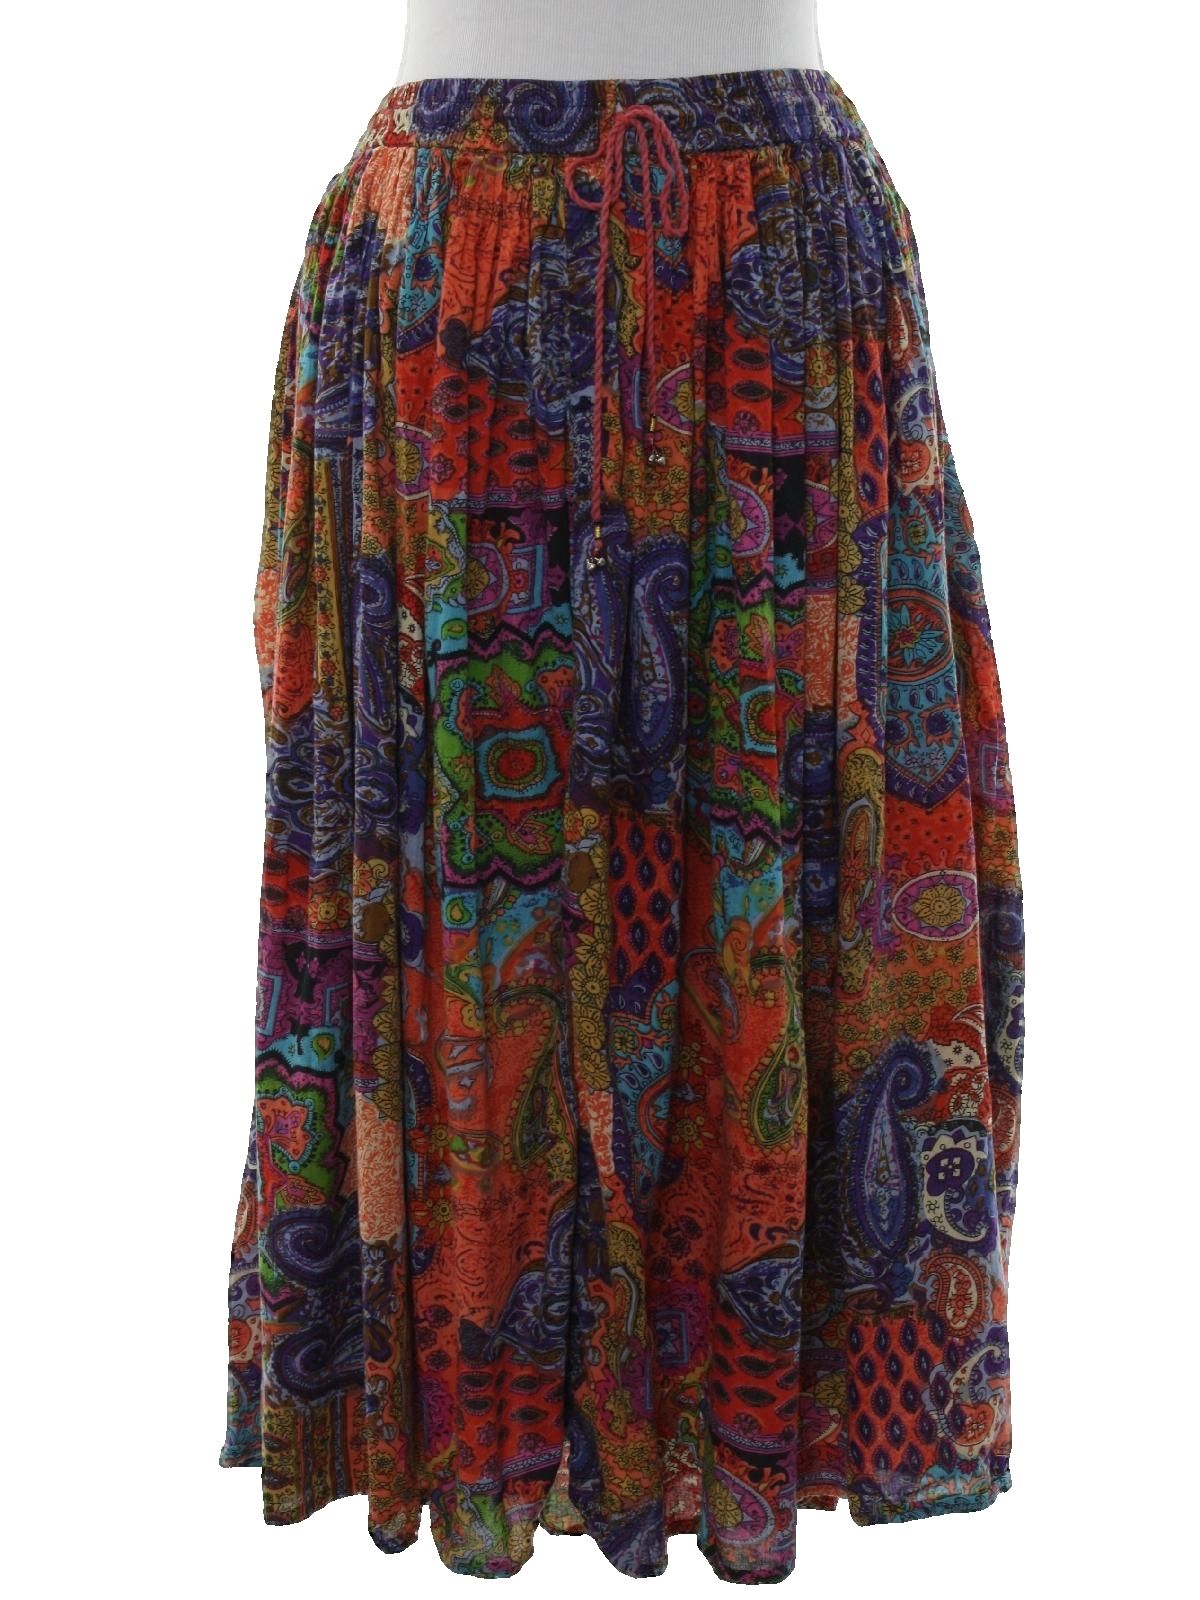 Vintage Take Two Clothing Co. Nineties Hippie Skirt: 90s -Take Two ...